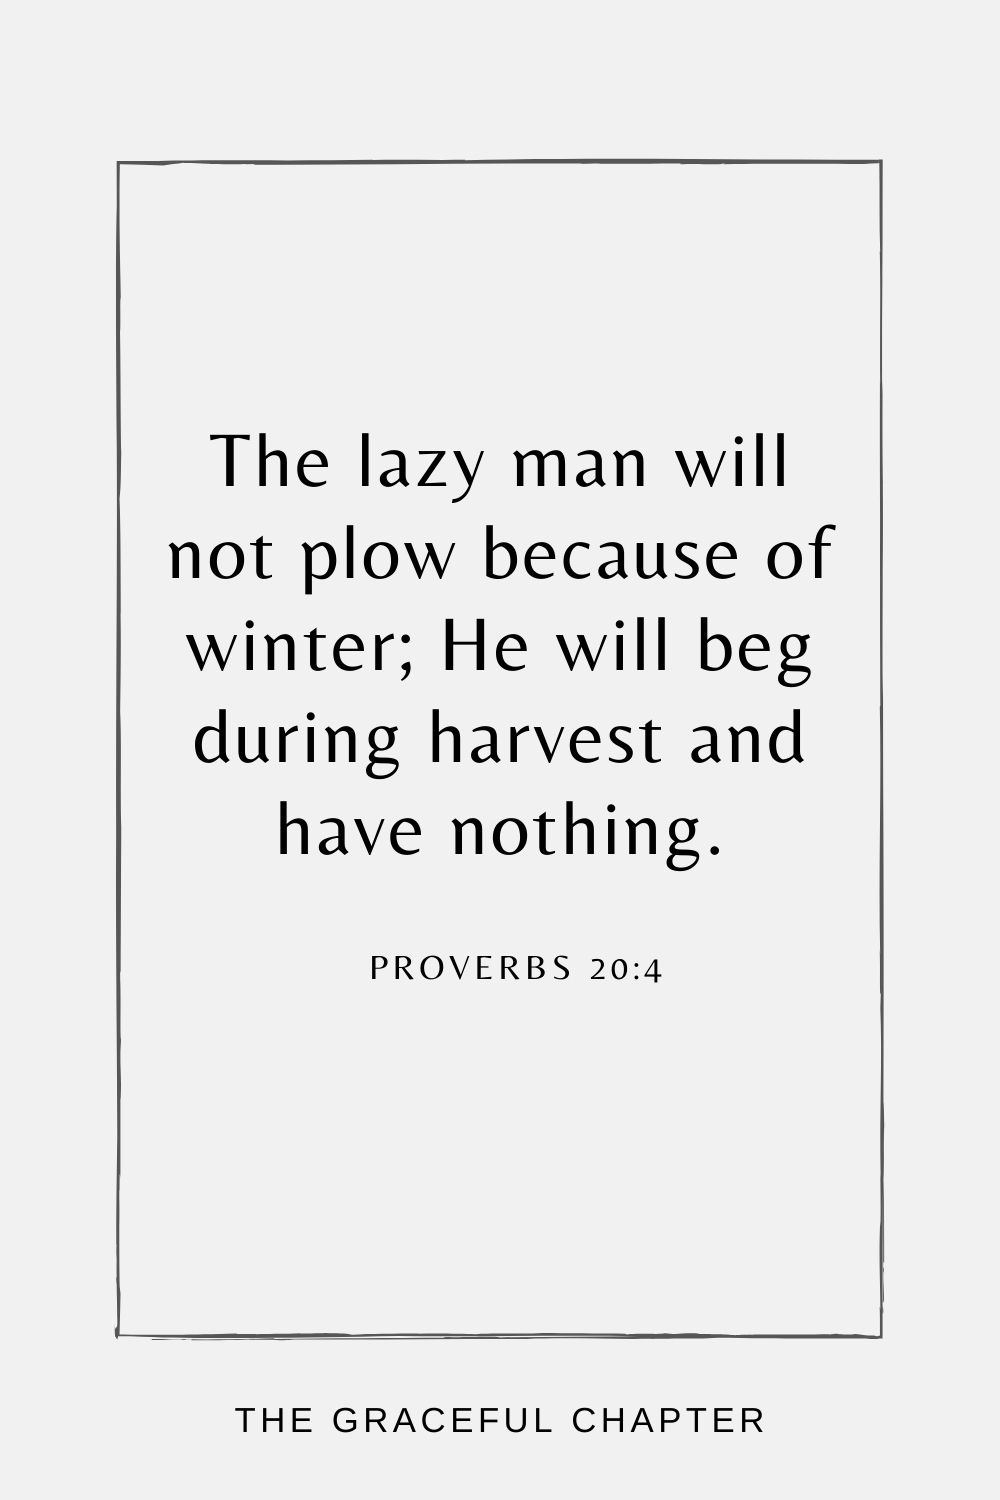 The lazy man will not plow because of winter; He will beg during harvest and have nothing. Proverbs 20:4